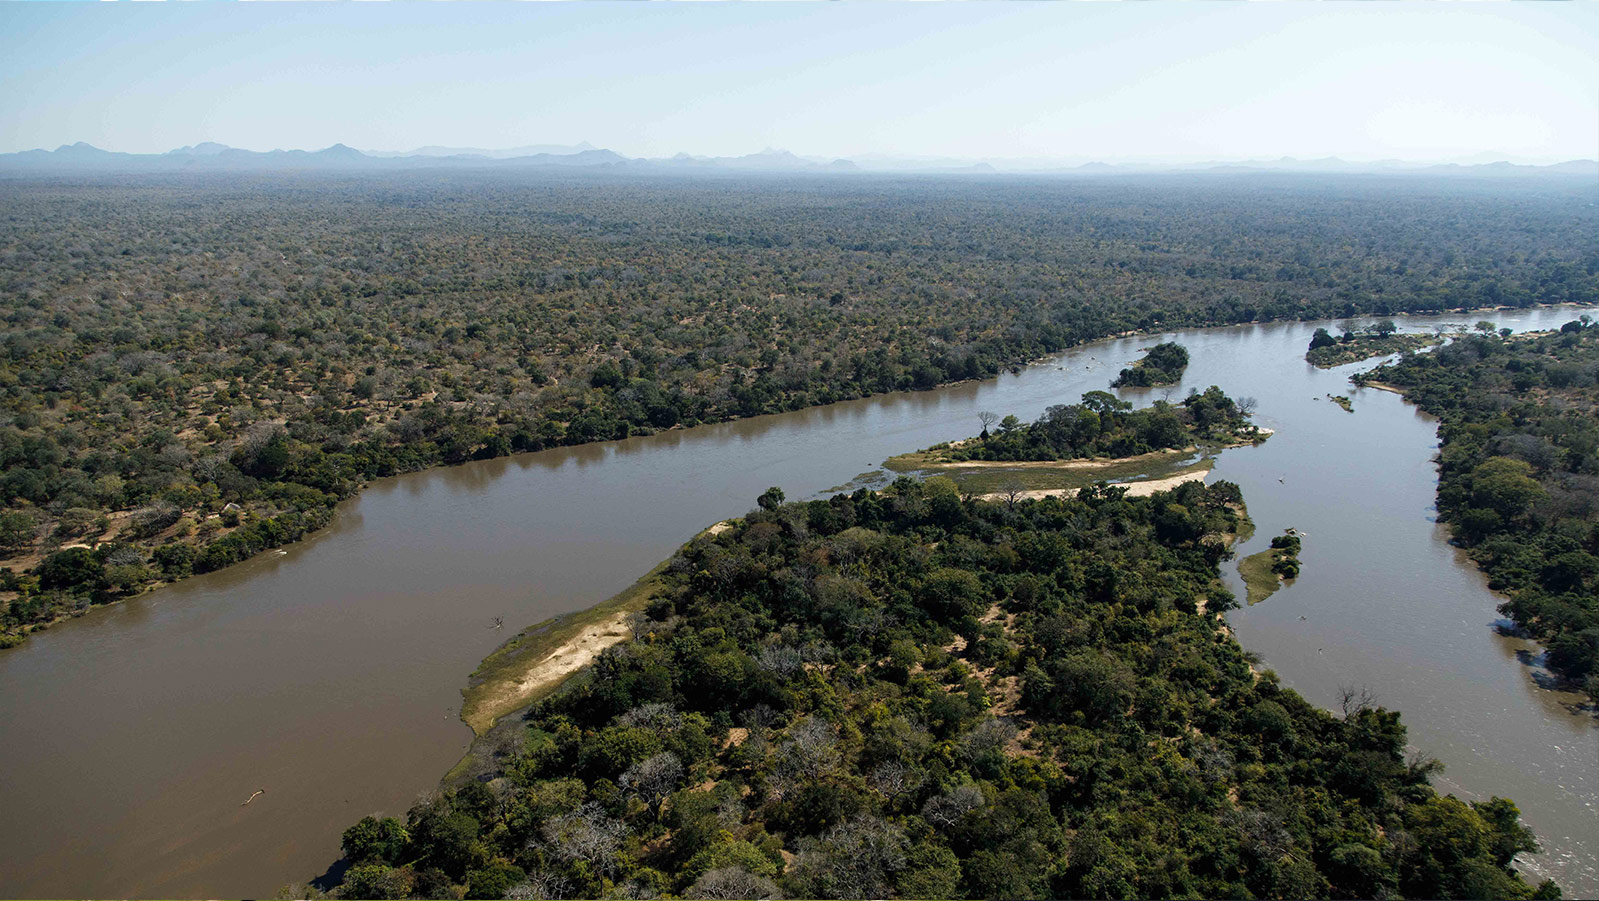 Aerial View of the Shire River in Malawi